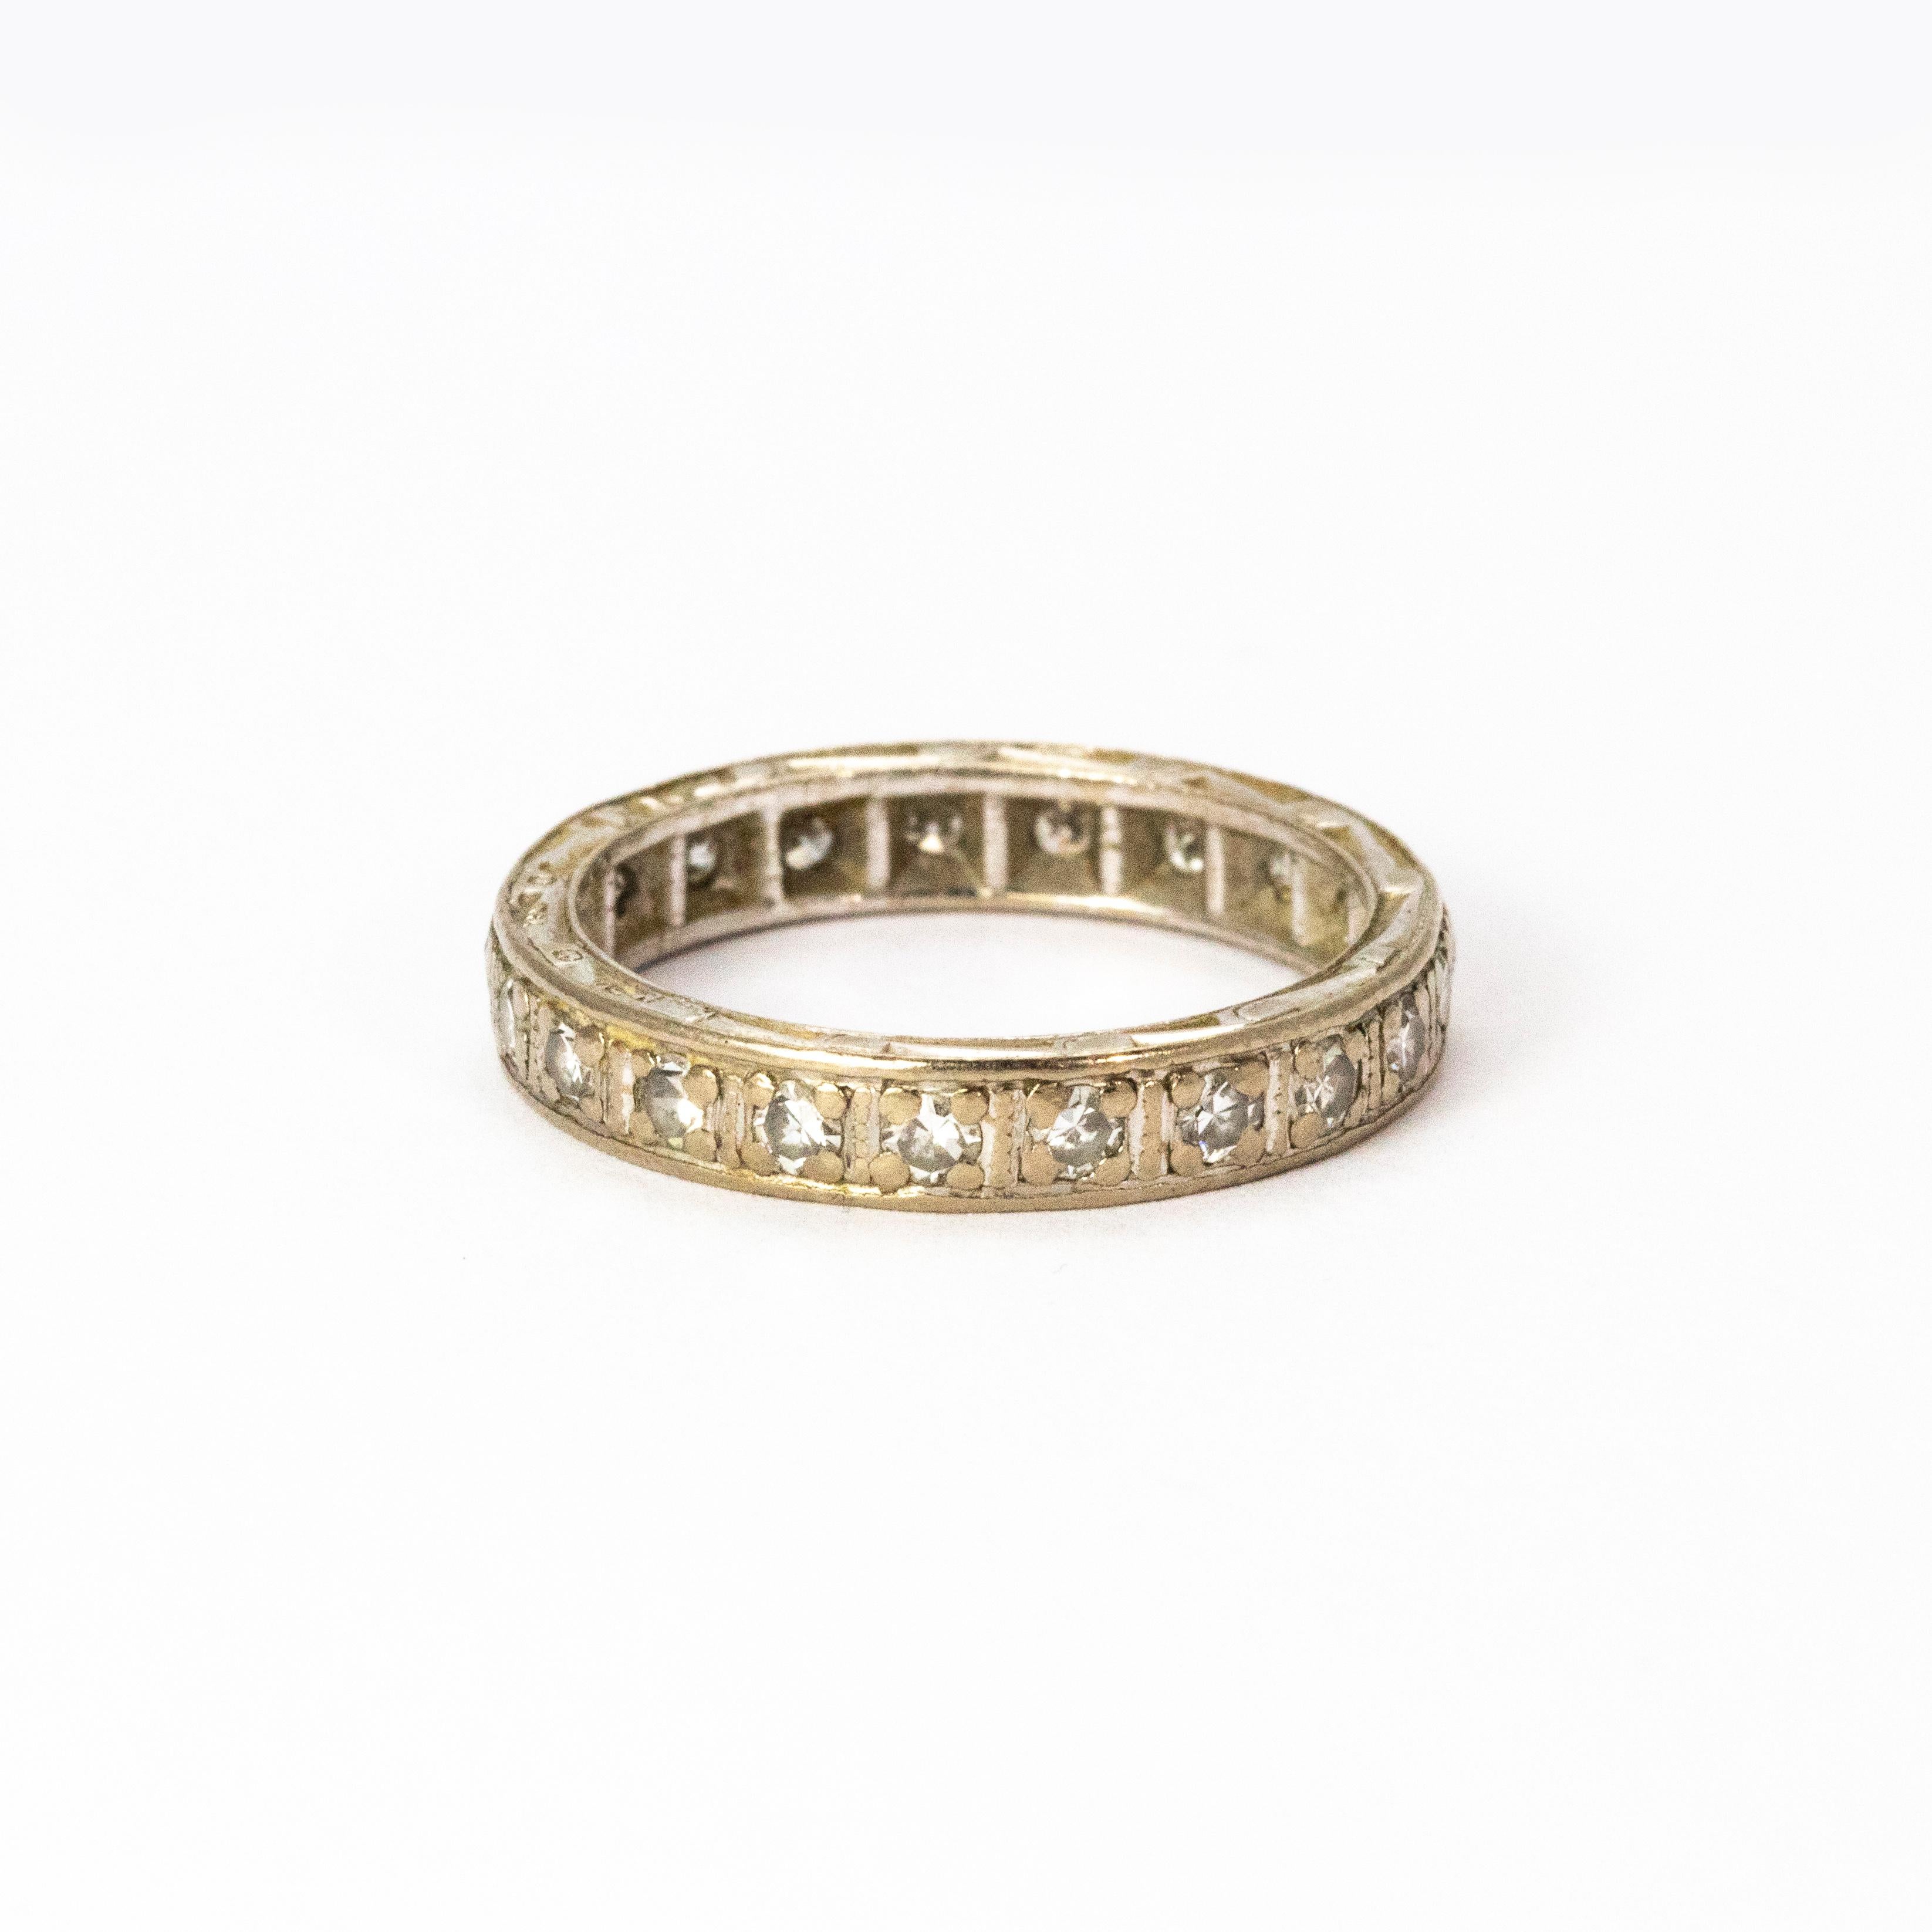 An elegant vintage eternity band with 22 round brilliant cut white diamonds in square settings. Modelled in 18 karat white gold, each stone weights 5 points. Total diamond weight 1.10 carats.

Ring size: H 1/2 or 4 

(Certification to follow)

